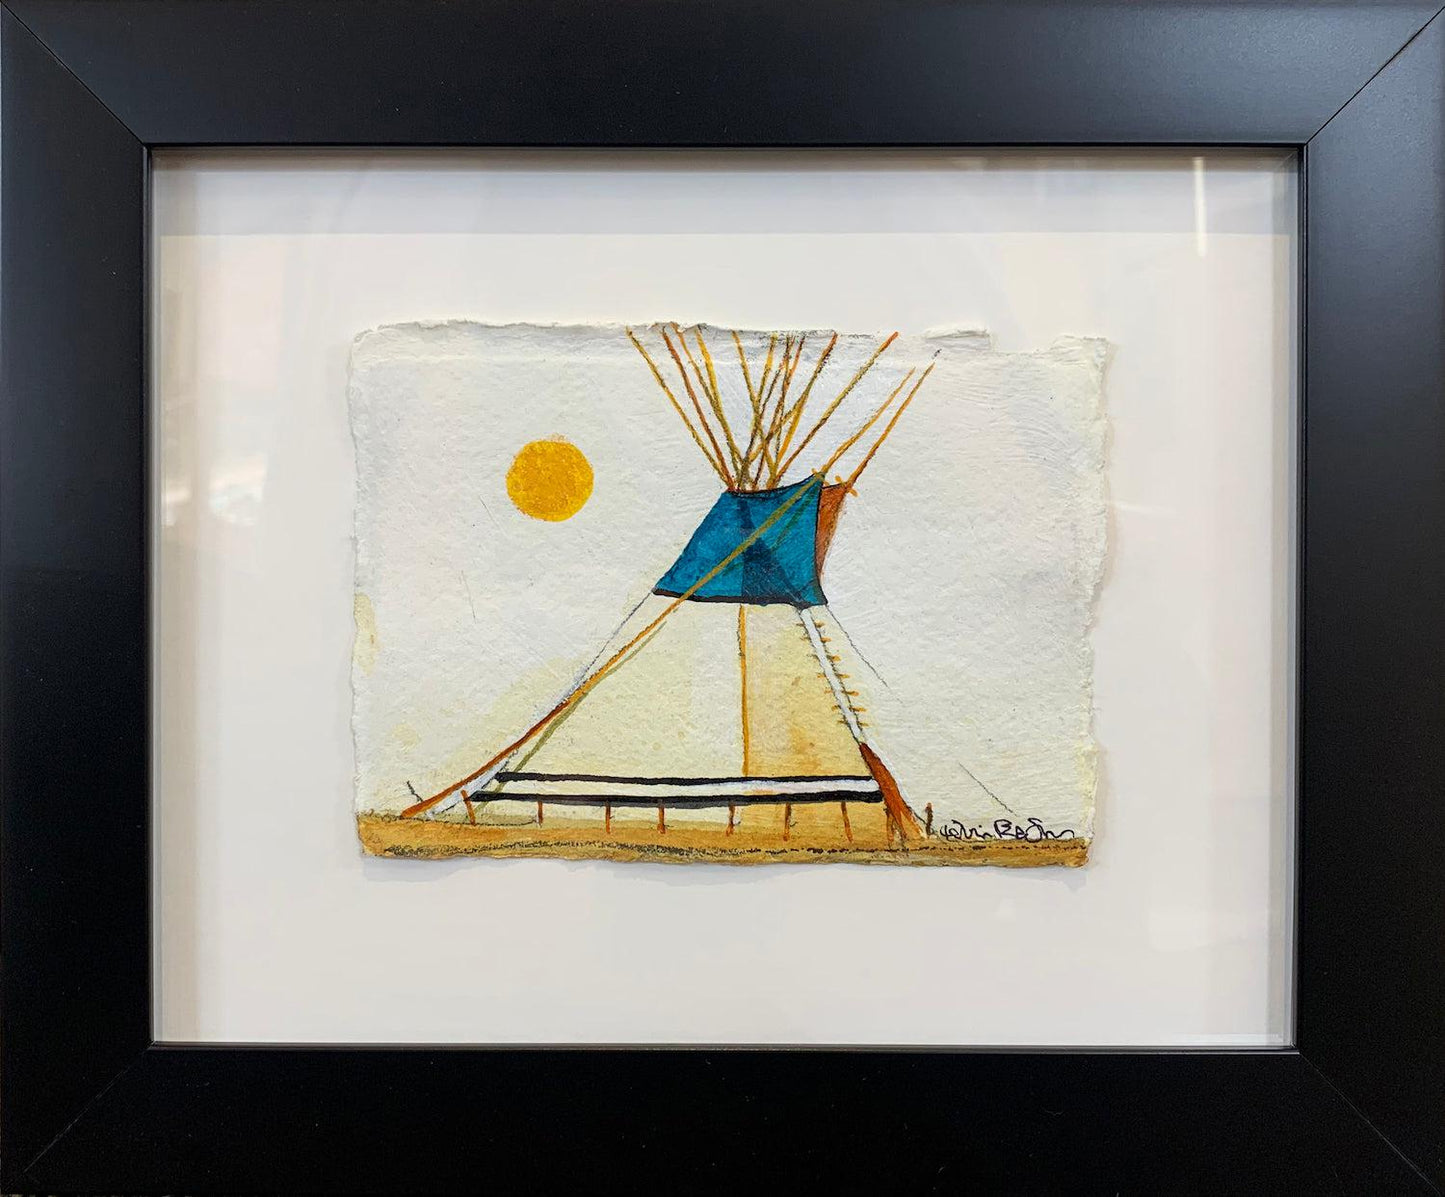 Tipi Study on Paper-Painting-Kevin Red Star-Sorrel Sky Gallery